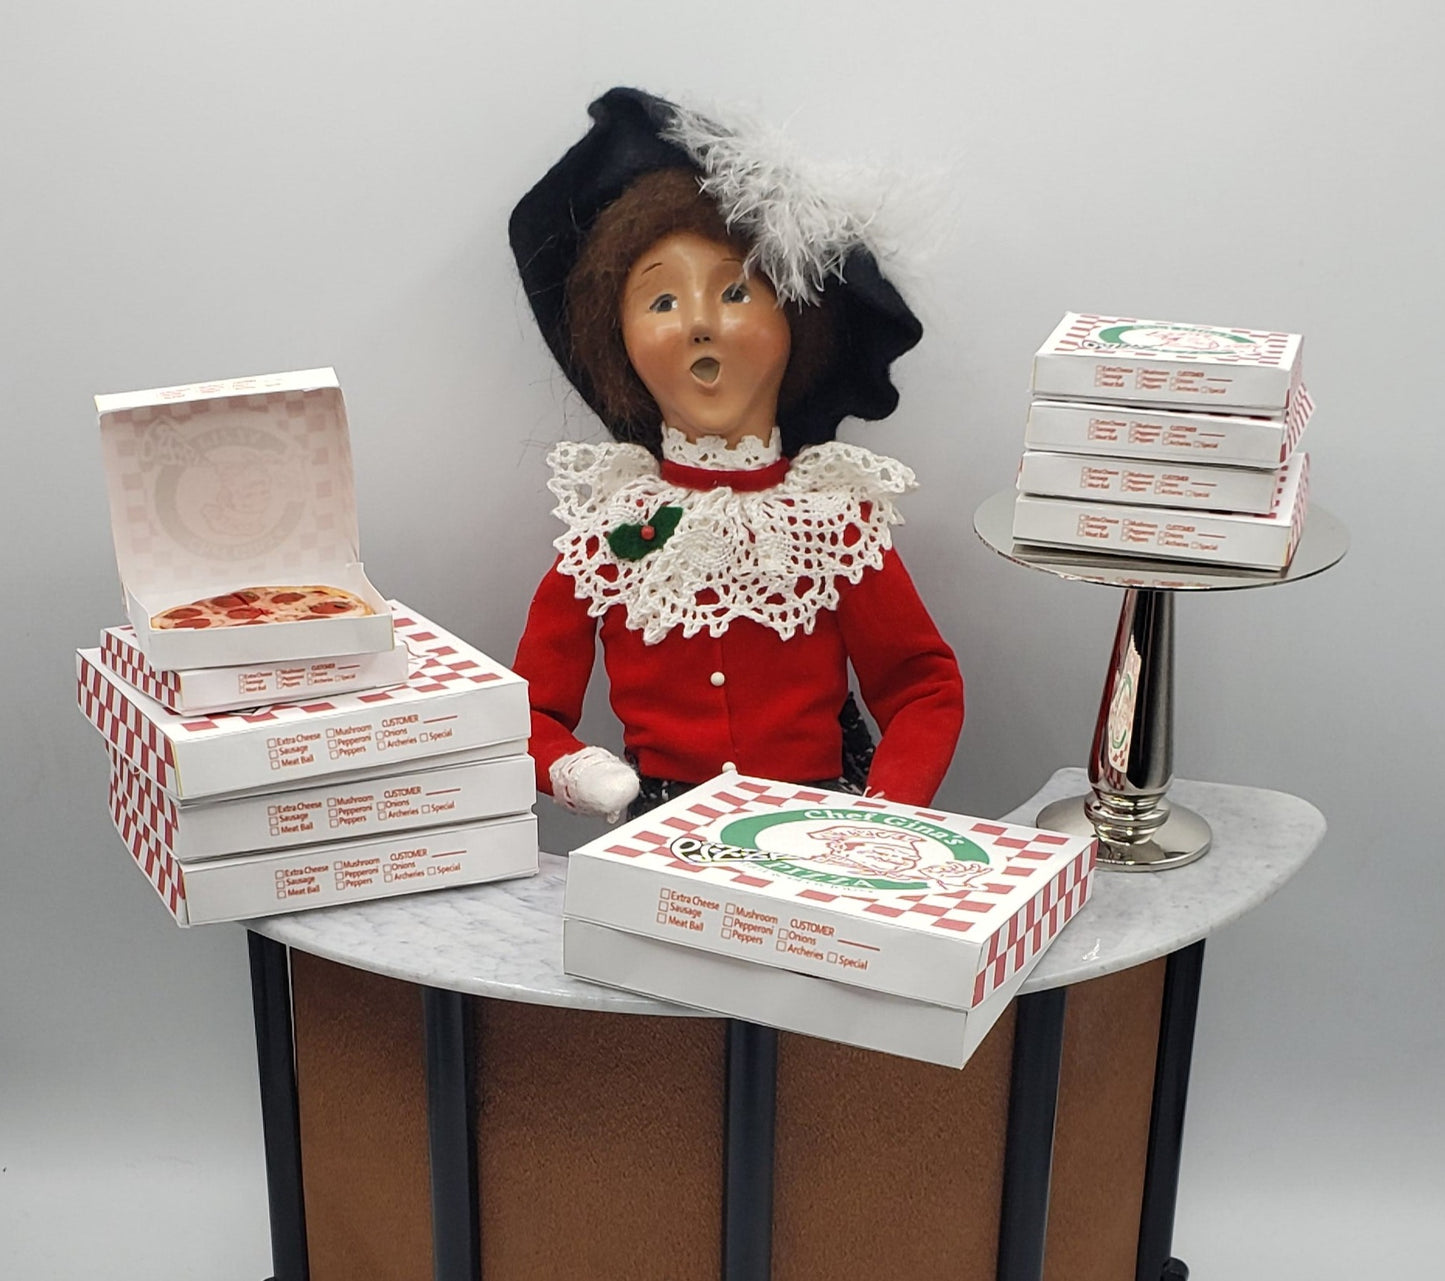 byers' choice doll with pizza